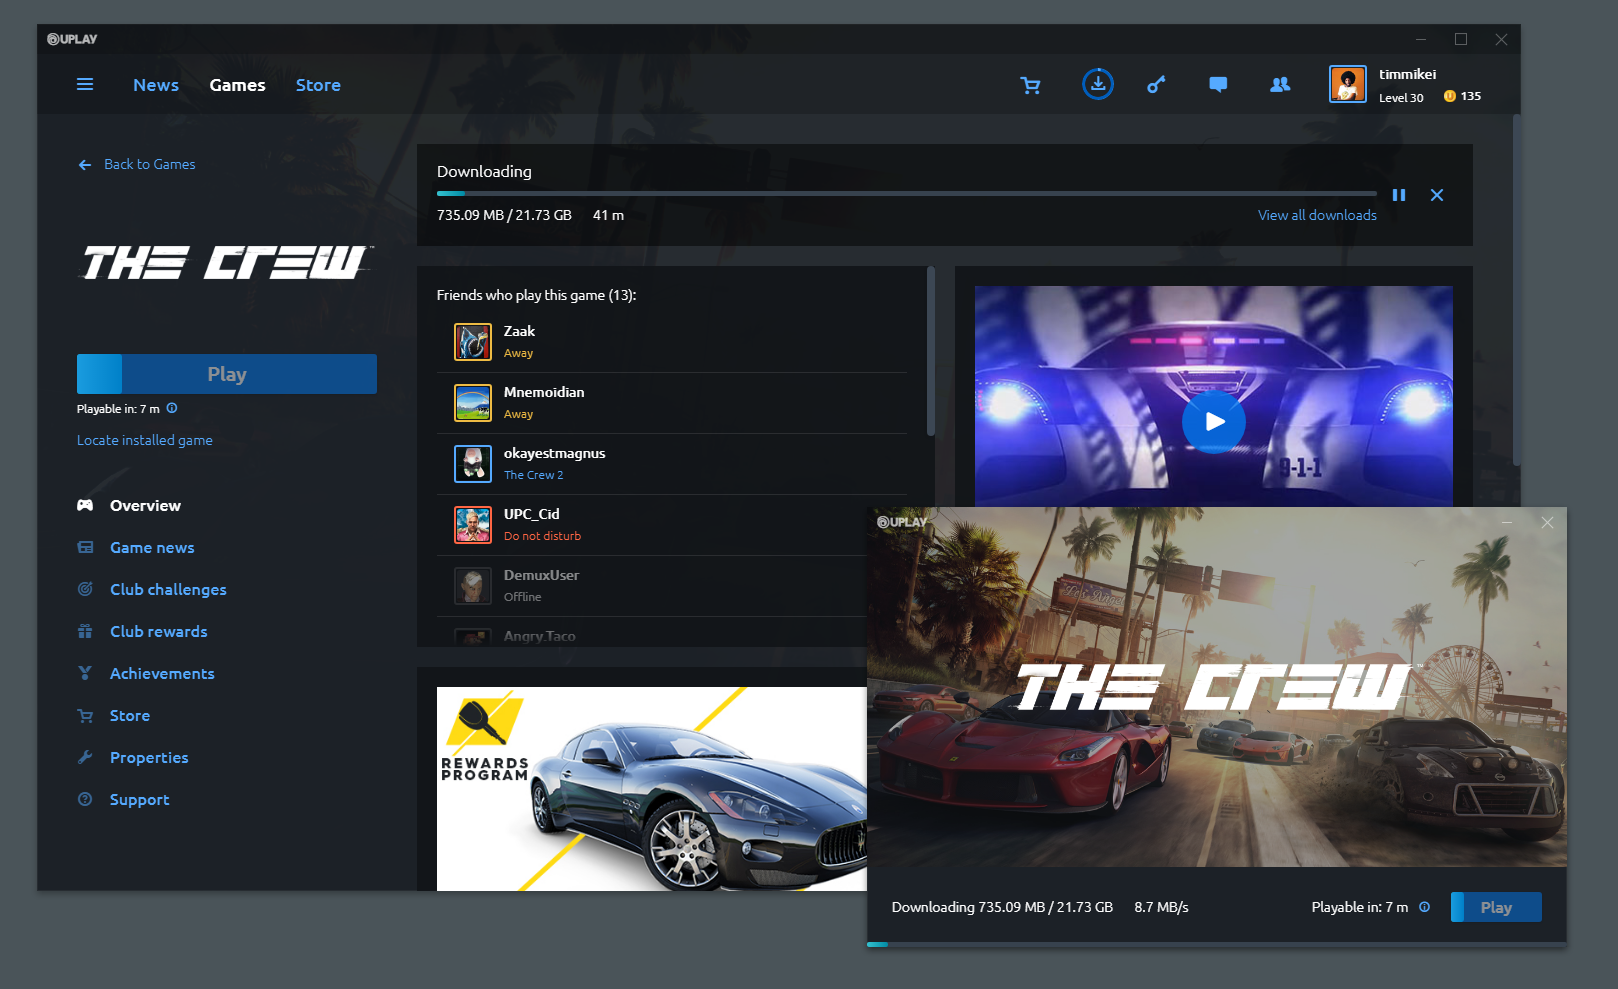 Uplay PC game page as it appeared when I left the project